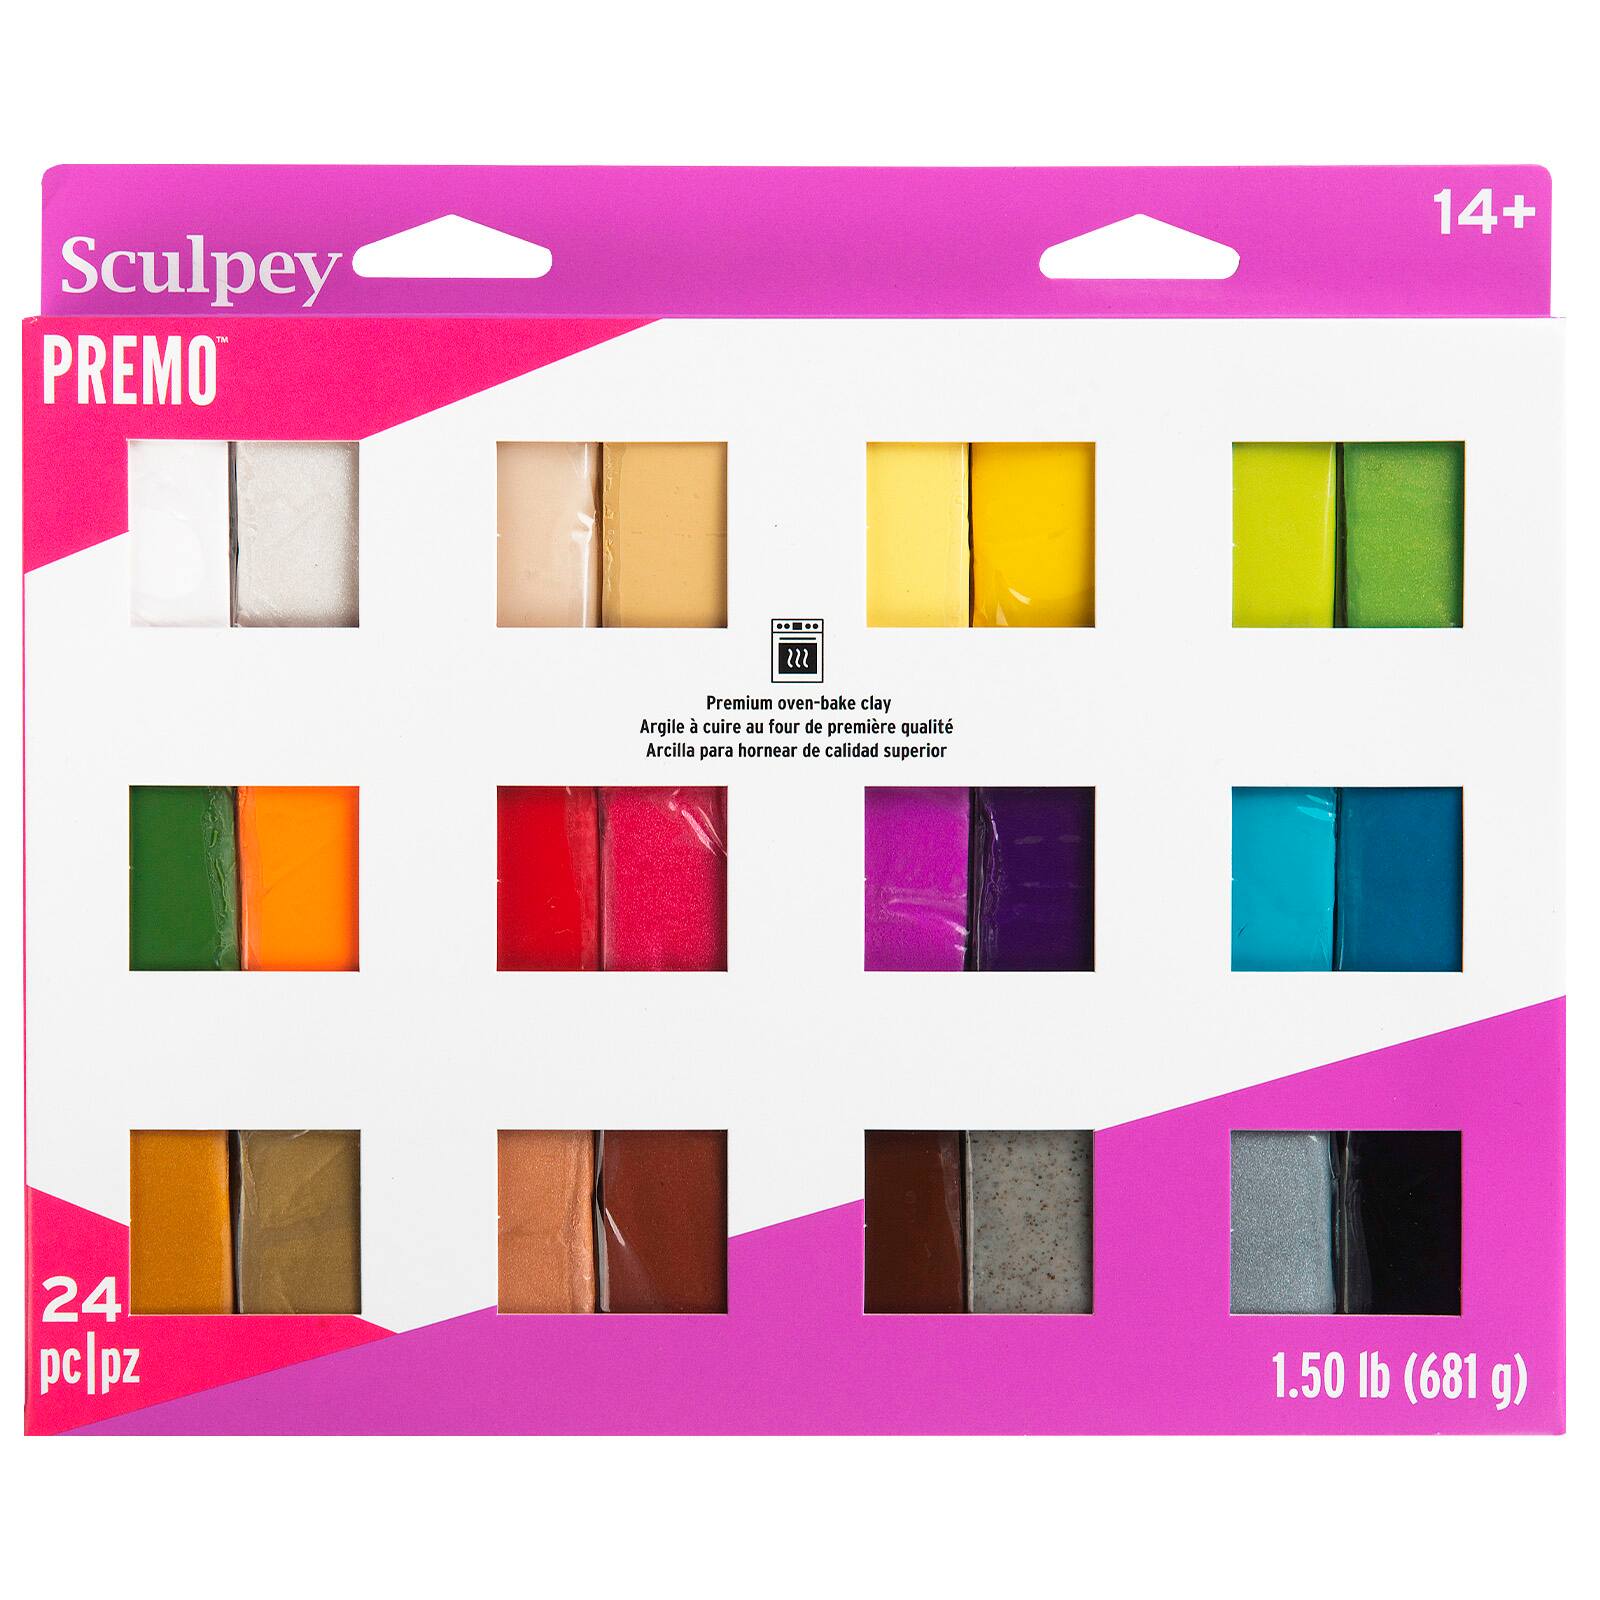 PREMO Sculpey Polymer Clay Sampler Vibrant Classic Colors 12 bars Modeling 